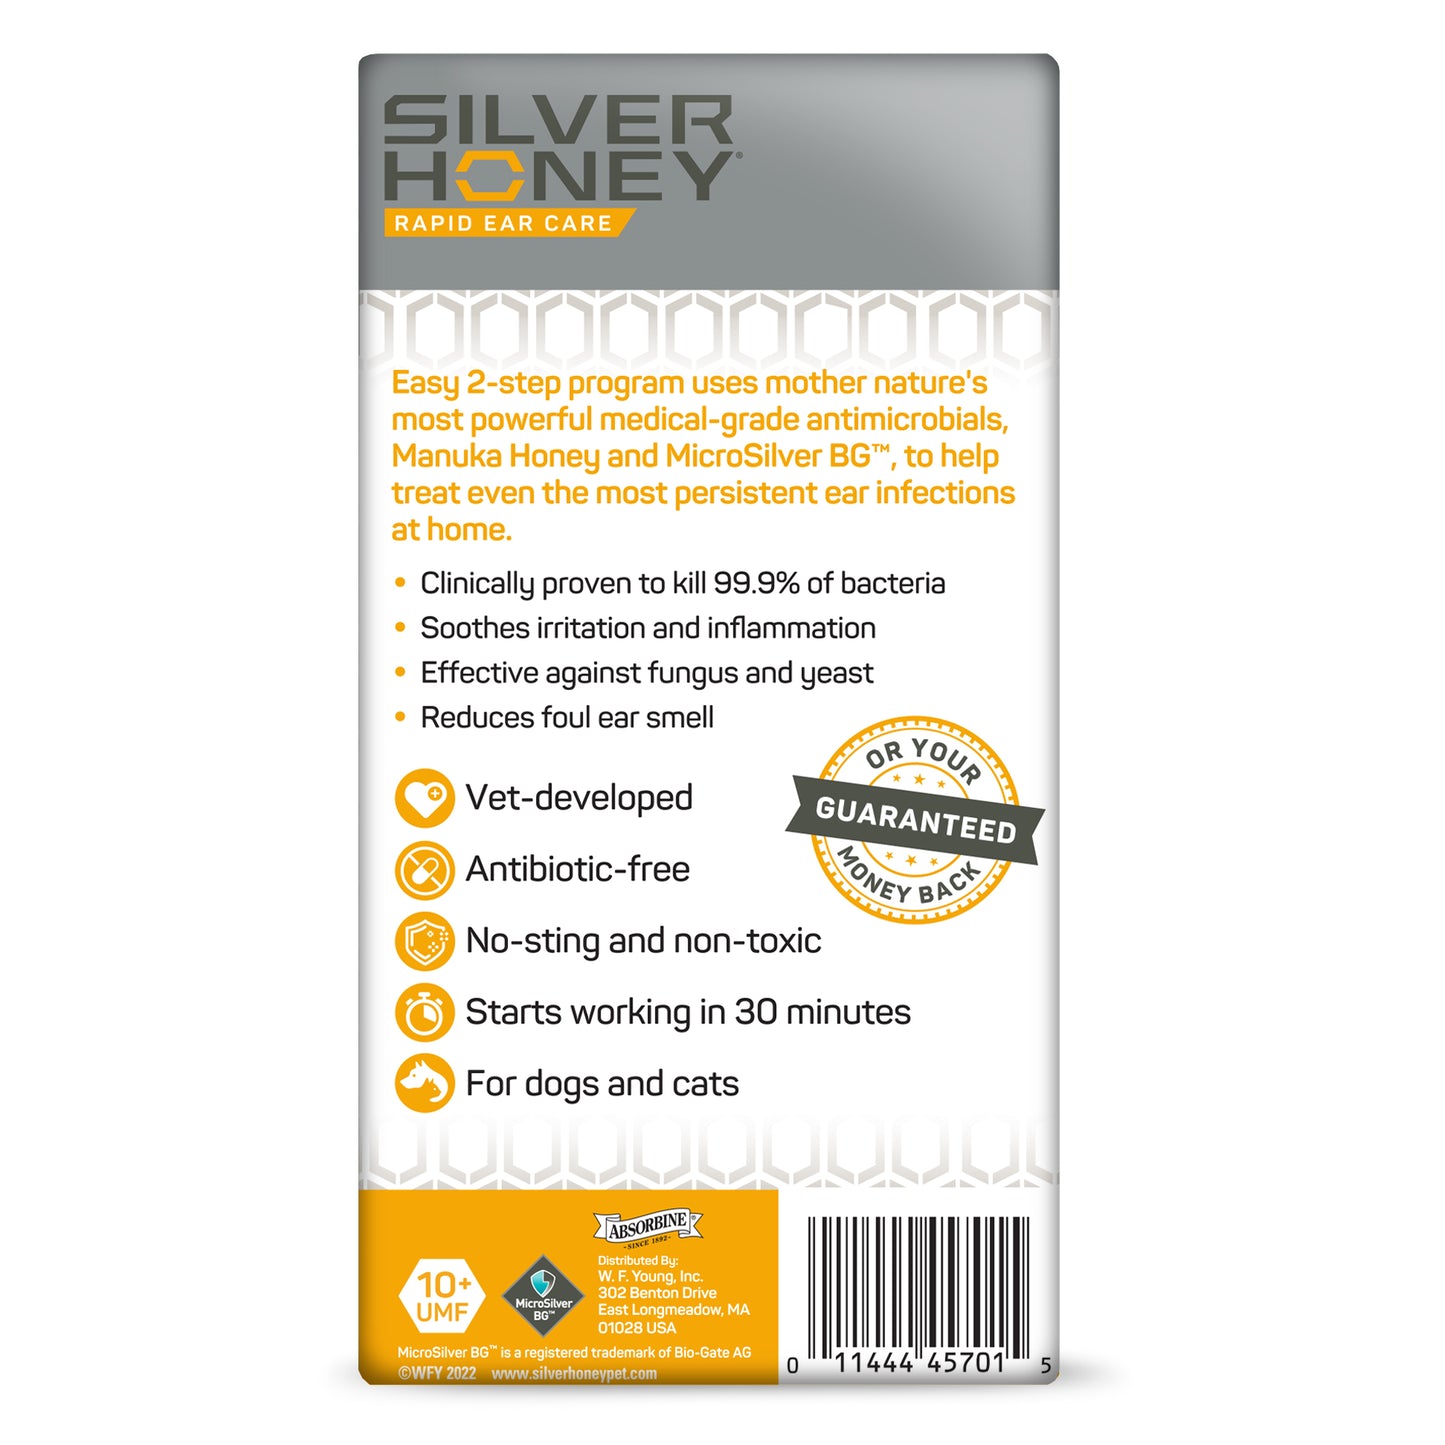 Back of the packaging of the Silver Honey Rapid Ear Care kit.  Easy 2-step program uses mother nature's most powerful medical-grade antimicrobials, Manuka Honey and Microsilver BG, to help treat even more persistent ear infections at home.